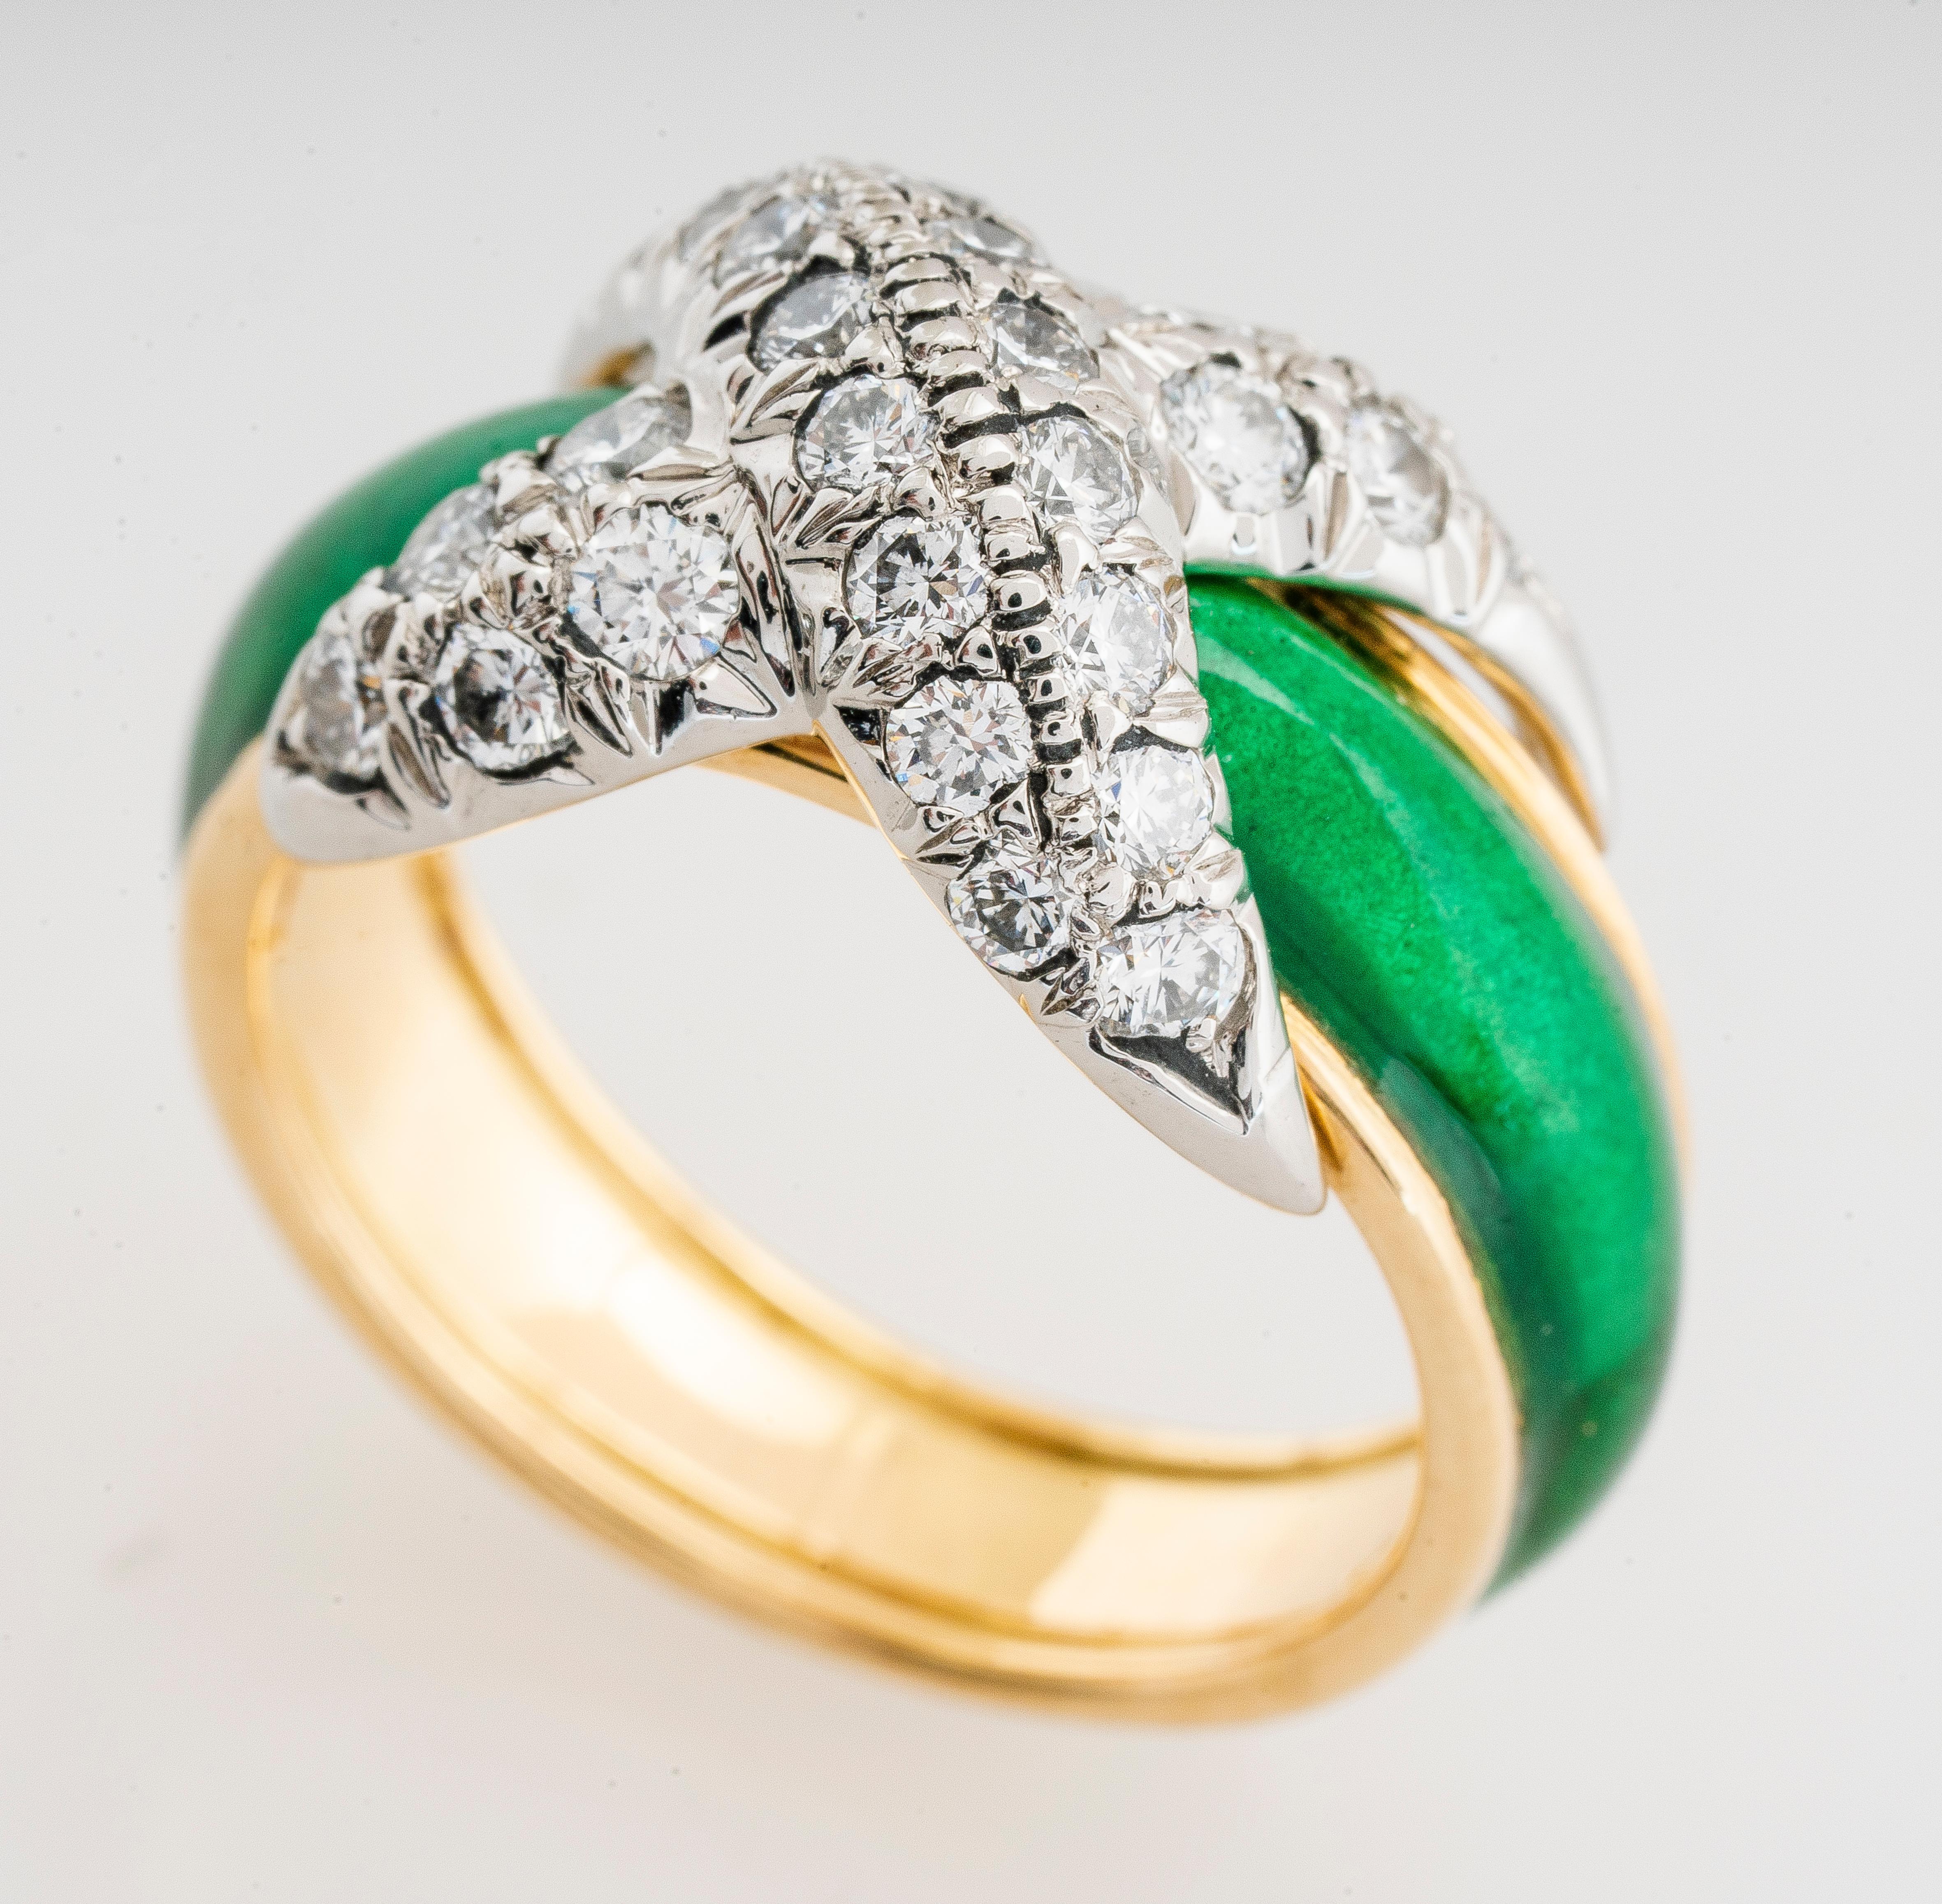 Vintage Tiffany & Co 18ky and platinum diamond and green enamel x-style ring designed by Jean Schlumberger.  Diamonds are 0.85 carat total weight G-H color and VS2 clarity.  Green enameling is vivid and in great condition. 
Ring is a size 5.25 and